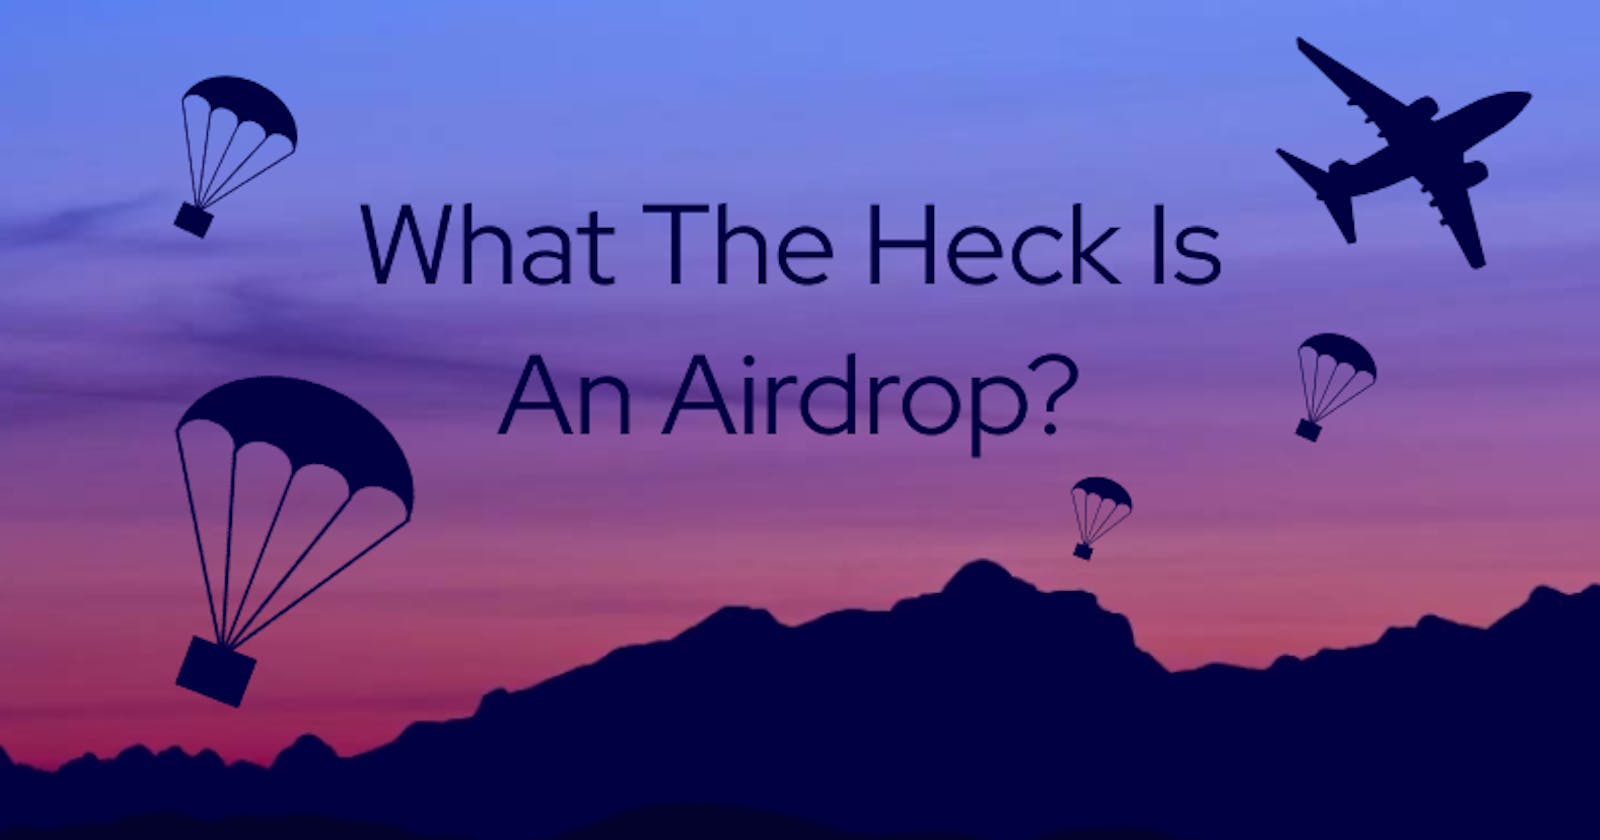 What The Heck Is An Airdrop?